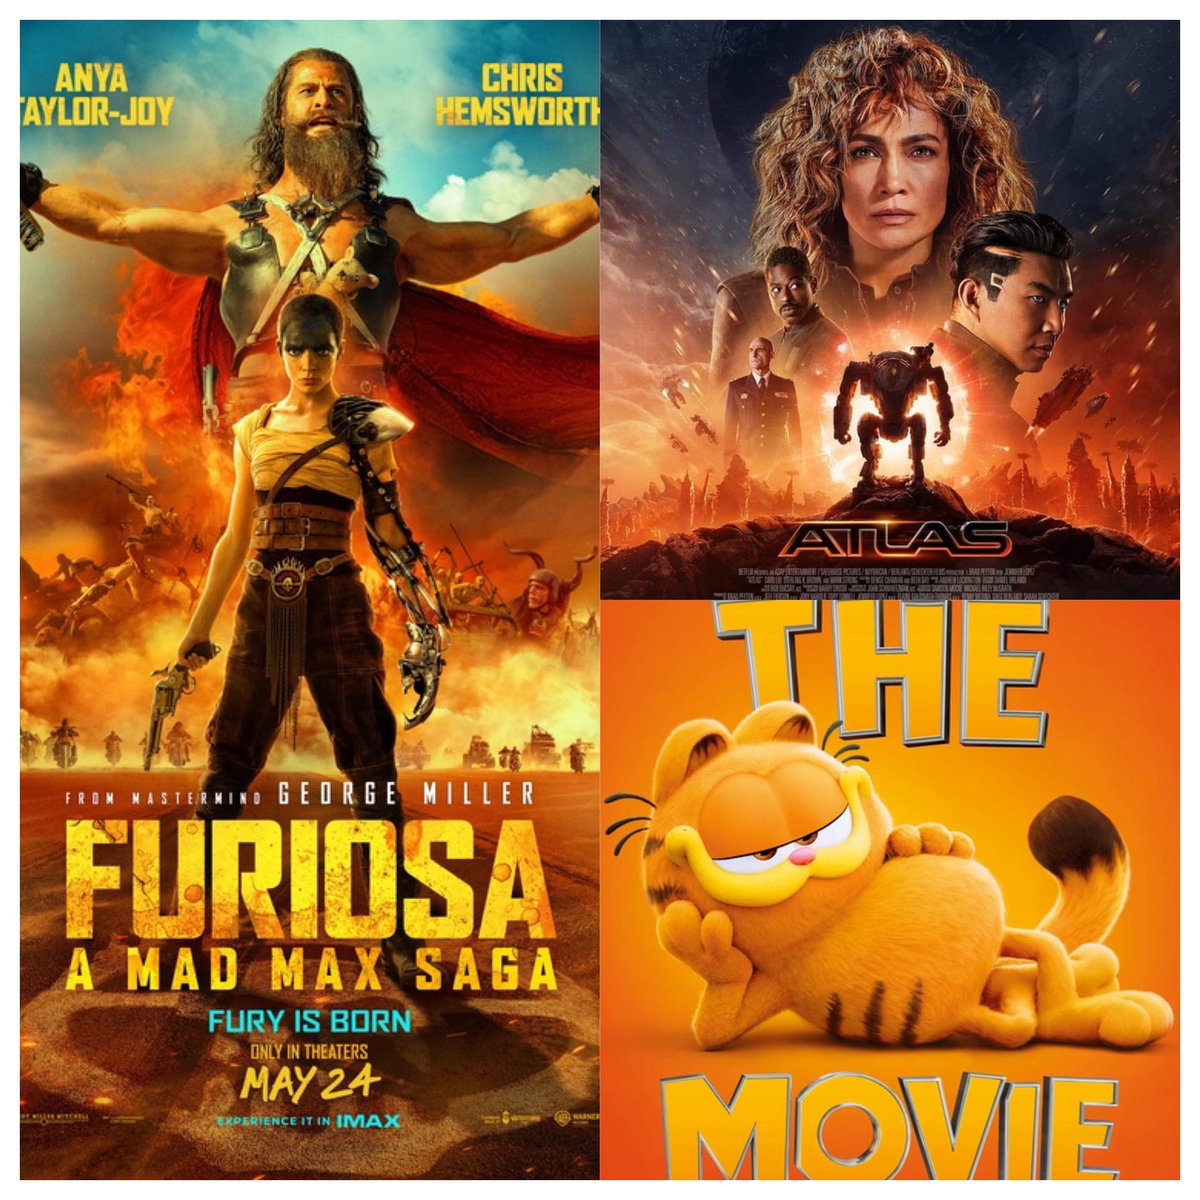 What do you plan on watching this weekend? #Atlas is on @netflix #Furiosa A Mad Max Saga and #TheGarfieldMovie are both in theaters #WreckLeaguePodcast